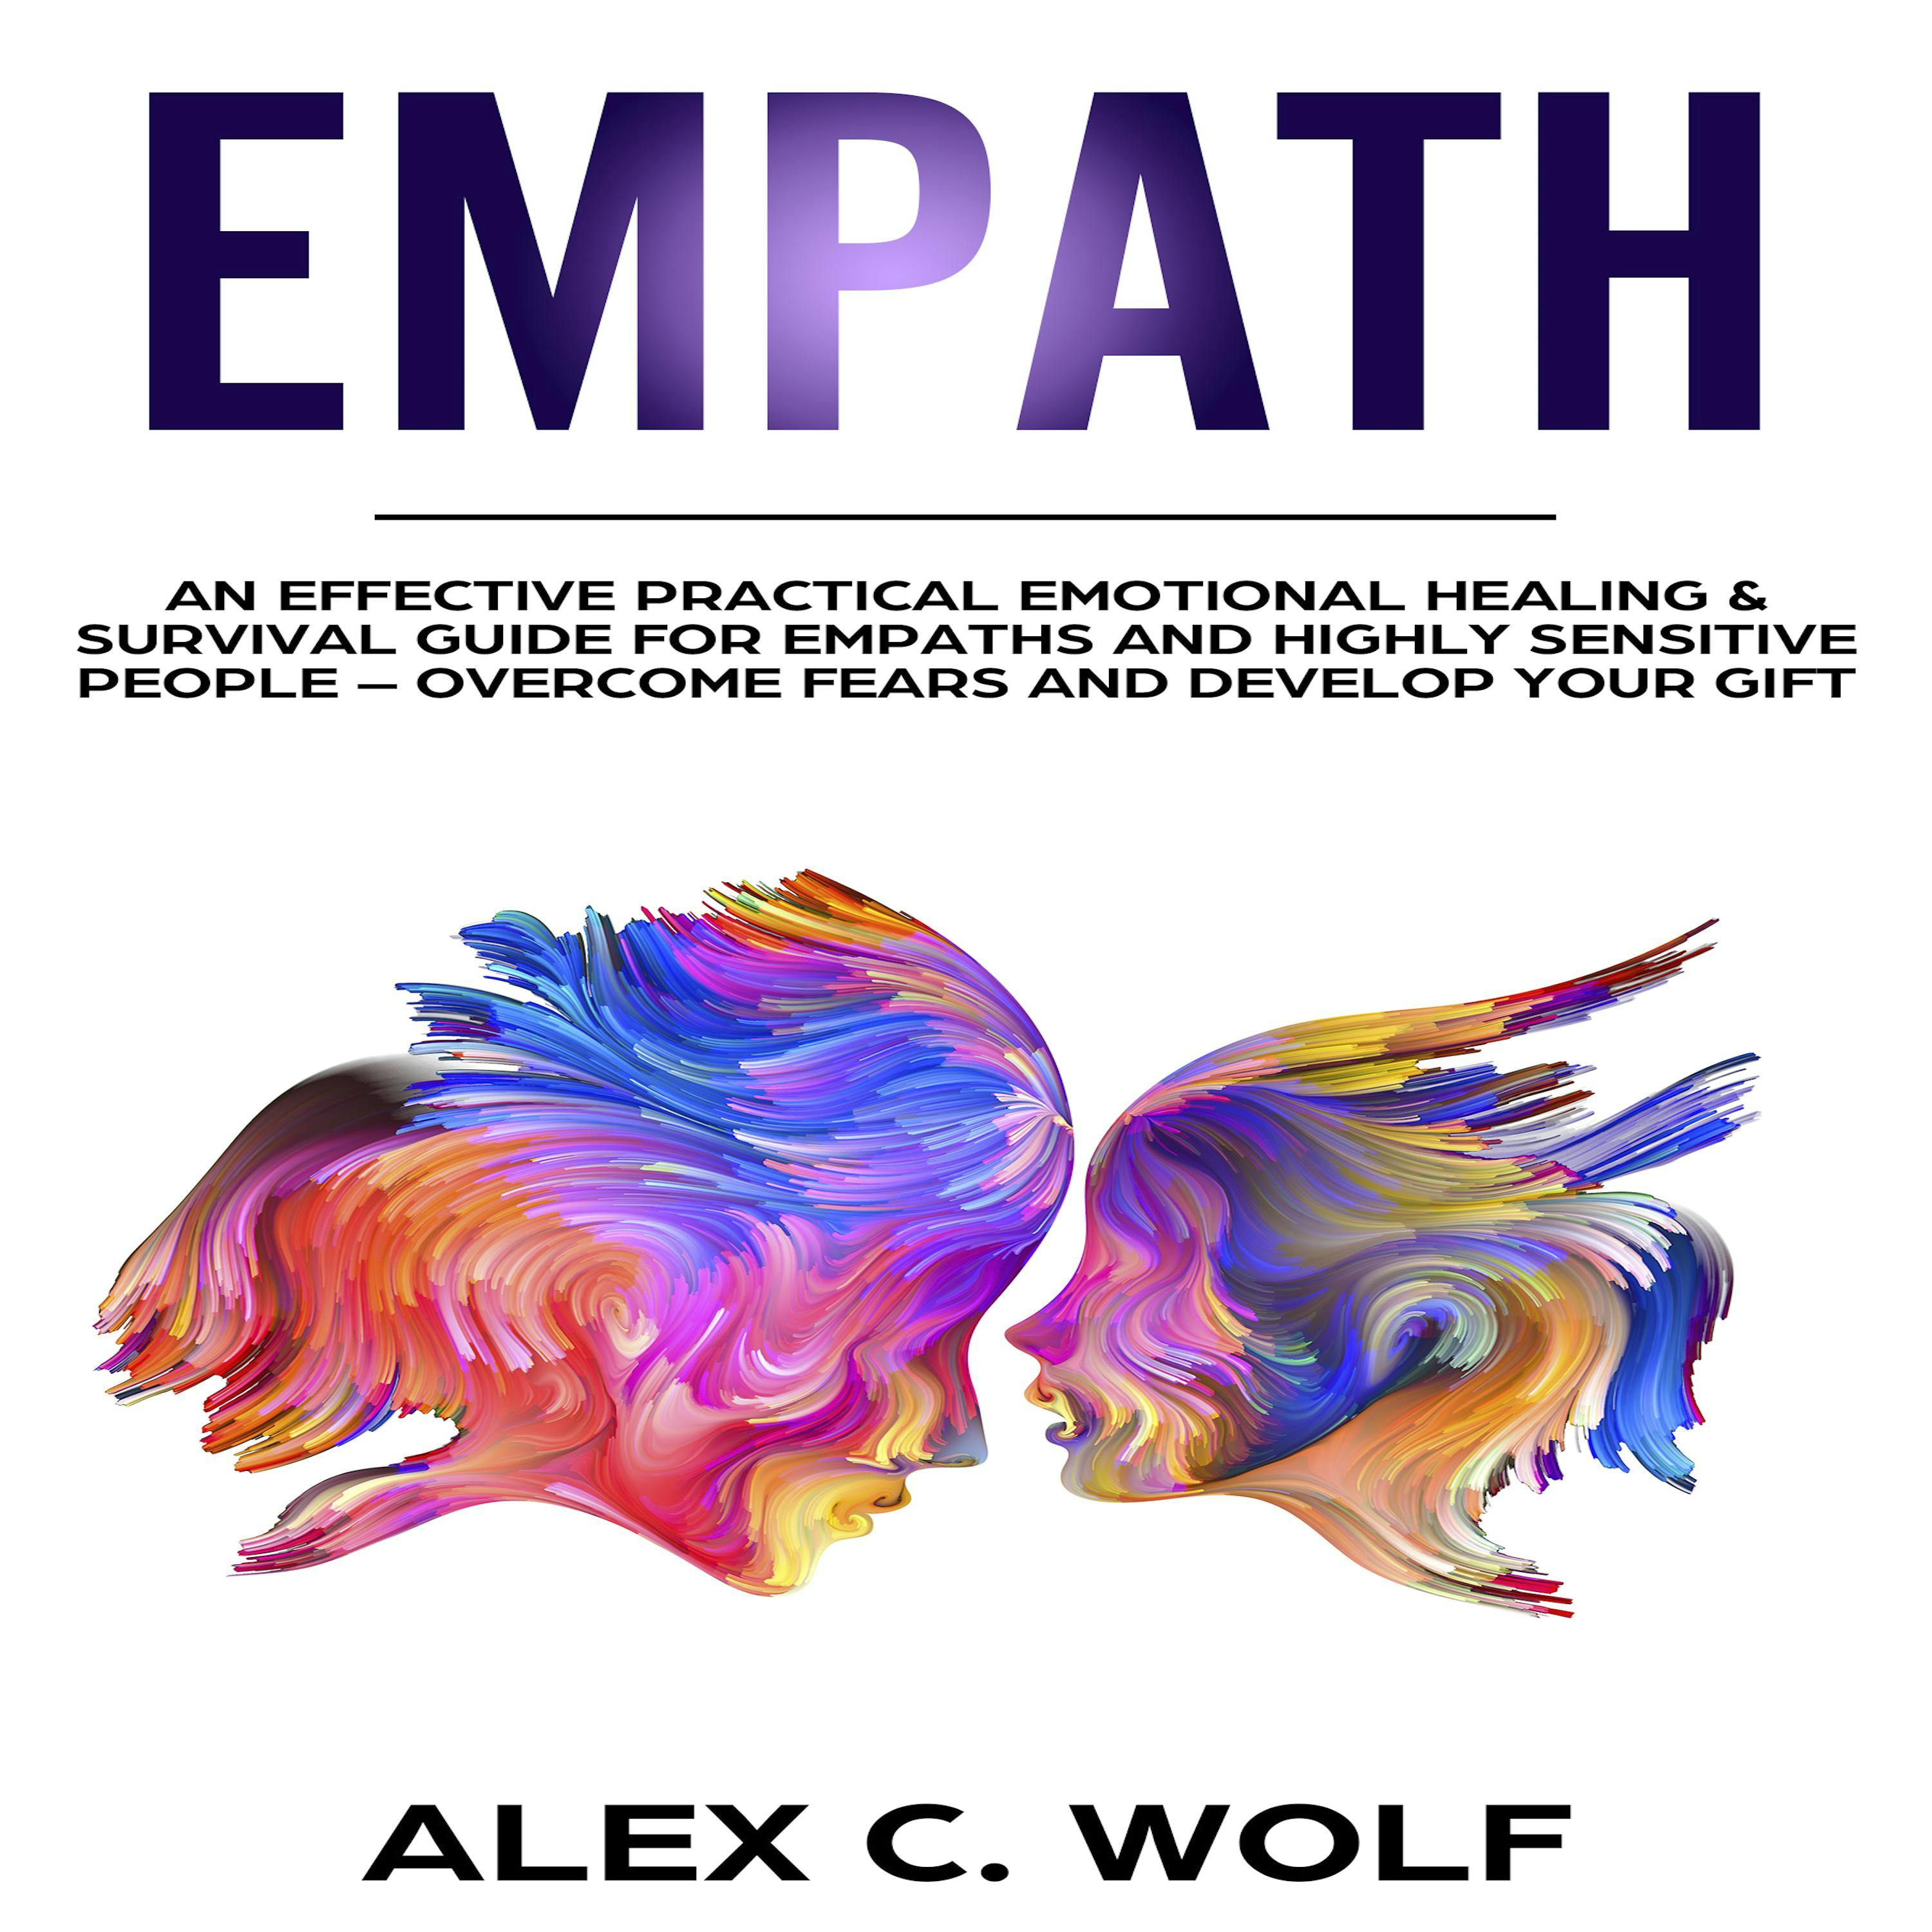 Empath: An Effective Practical Emotional Healing & Survival Guide for Empaths and Highly Sensitive People - Overcome Fears and Develop Your Gift - Alex C. Wolf